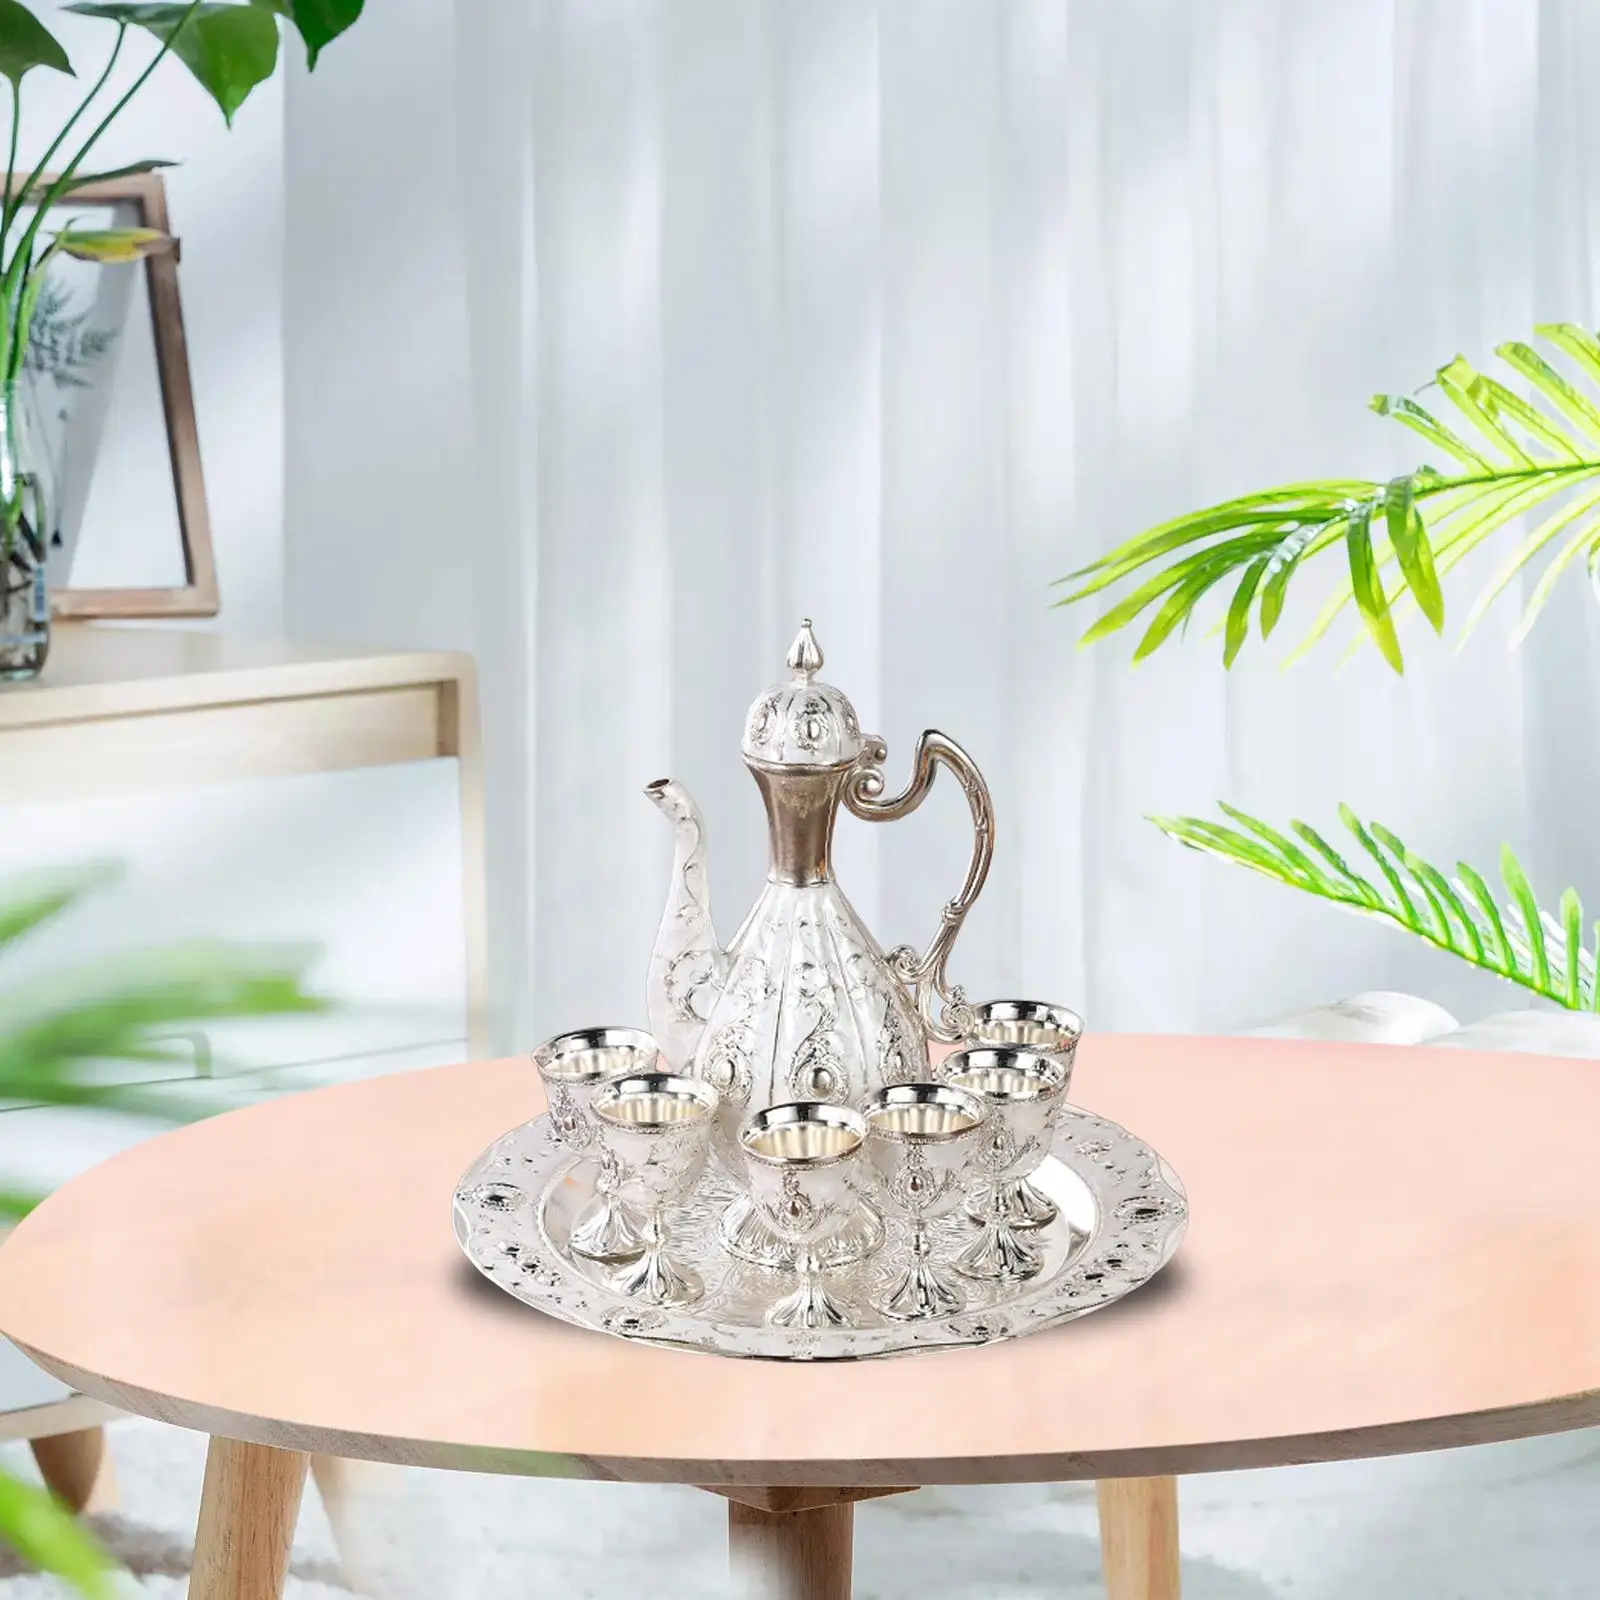 Vintage Style Coffee Pot Set, Tea Cup Tea Pot Set Storage Tray Drinkware for Dining Room Cafe Kitchen Cabinet Decoration